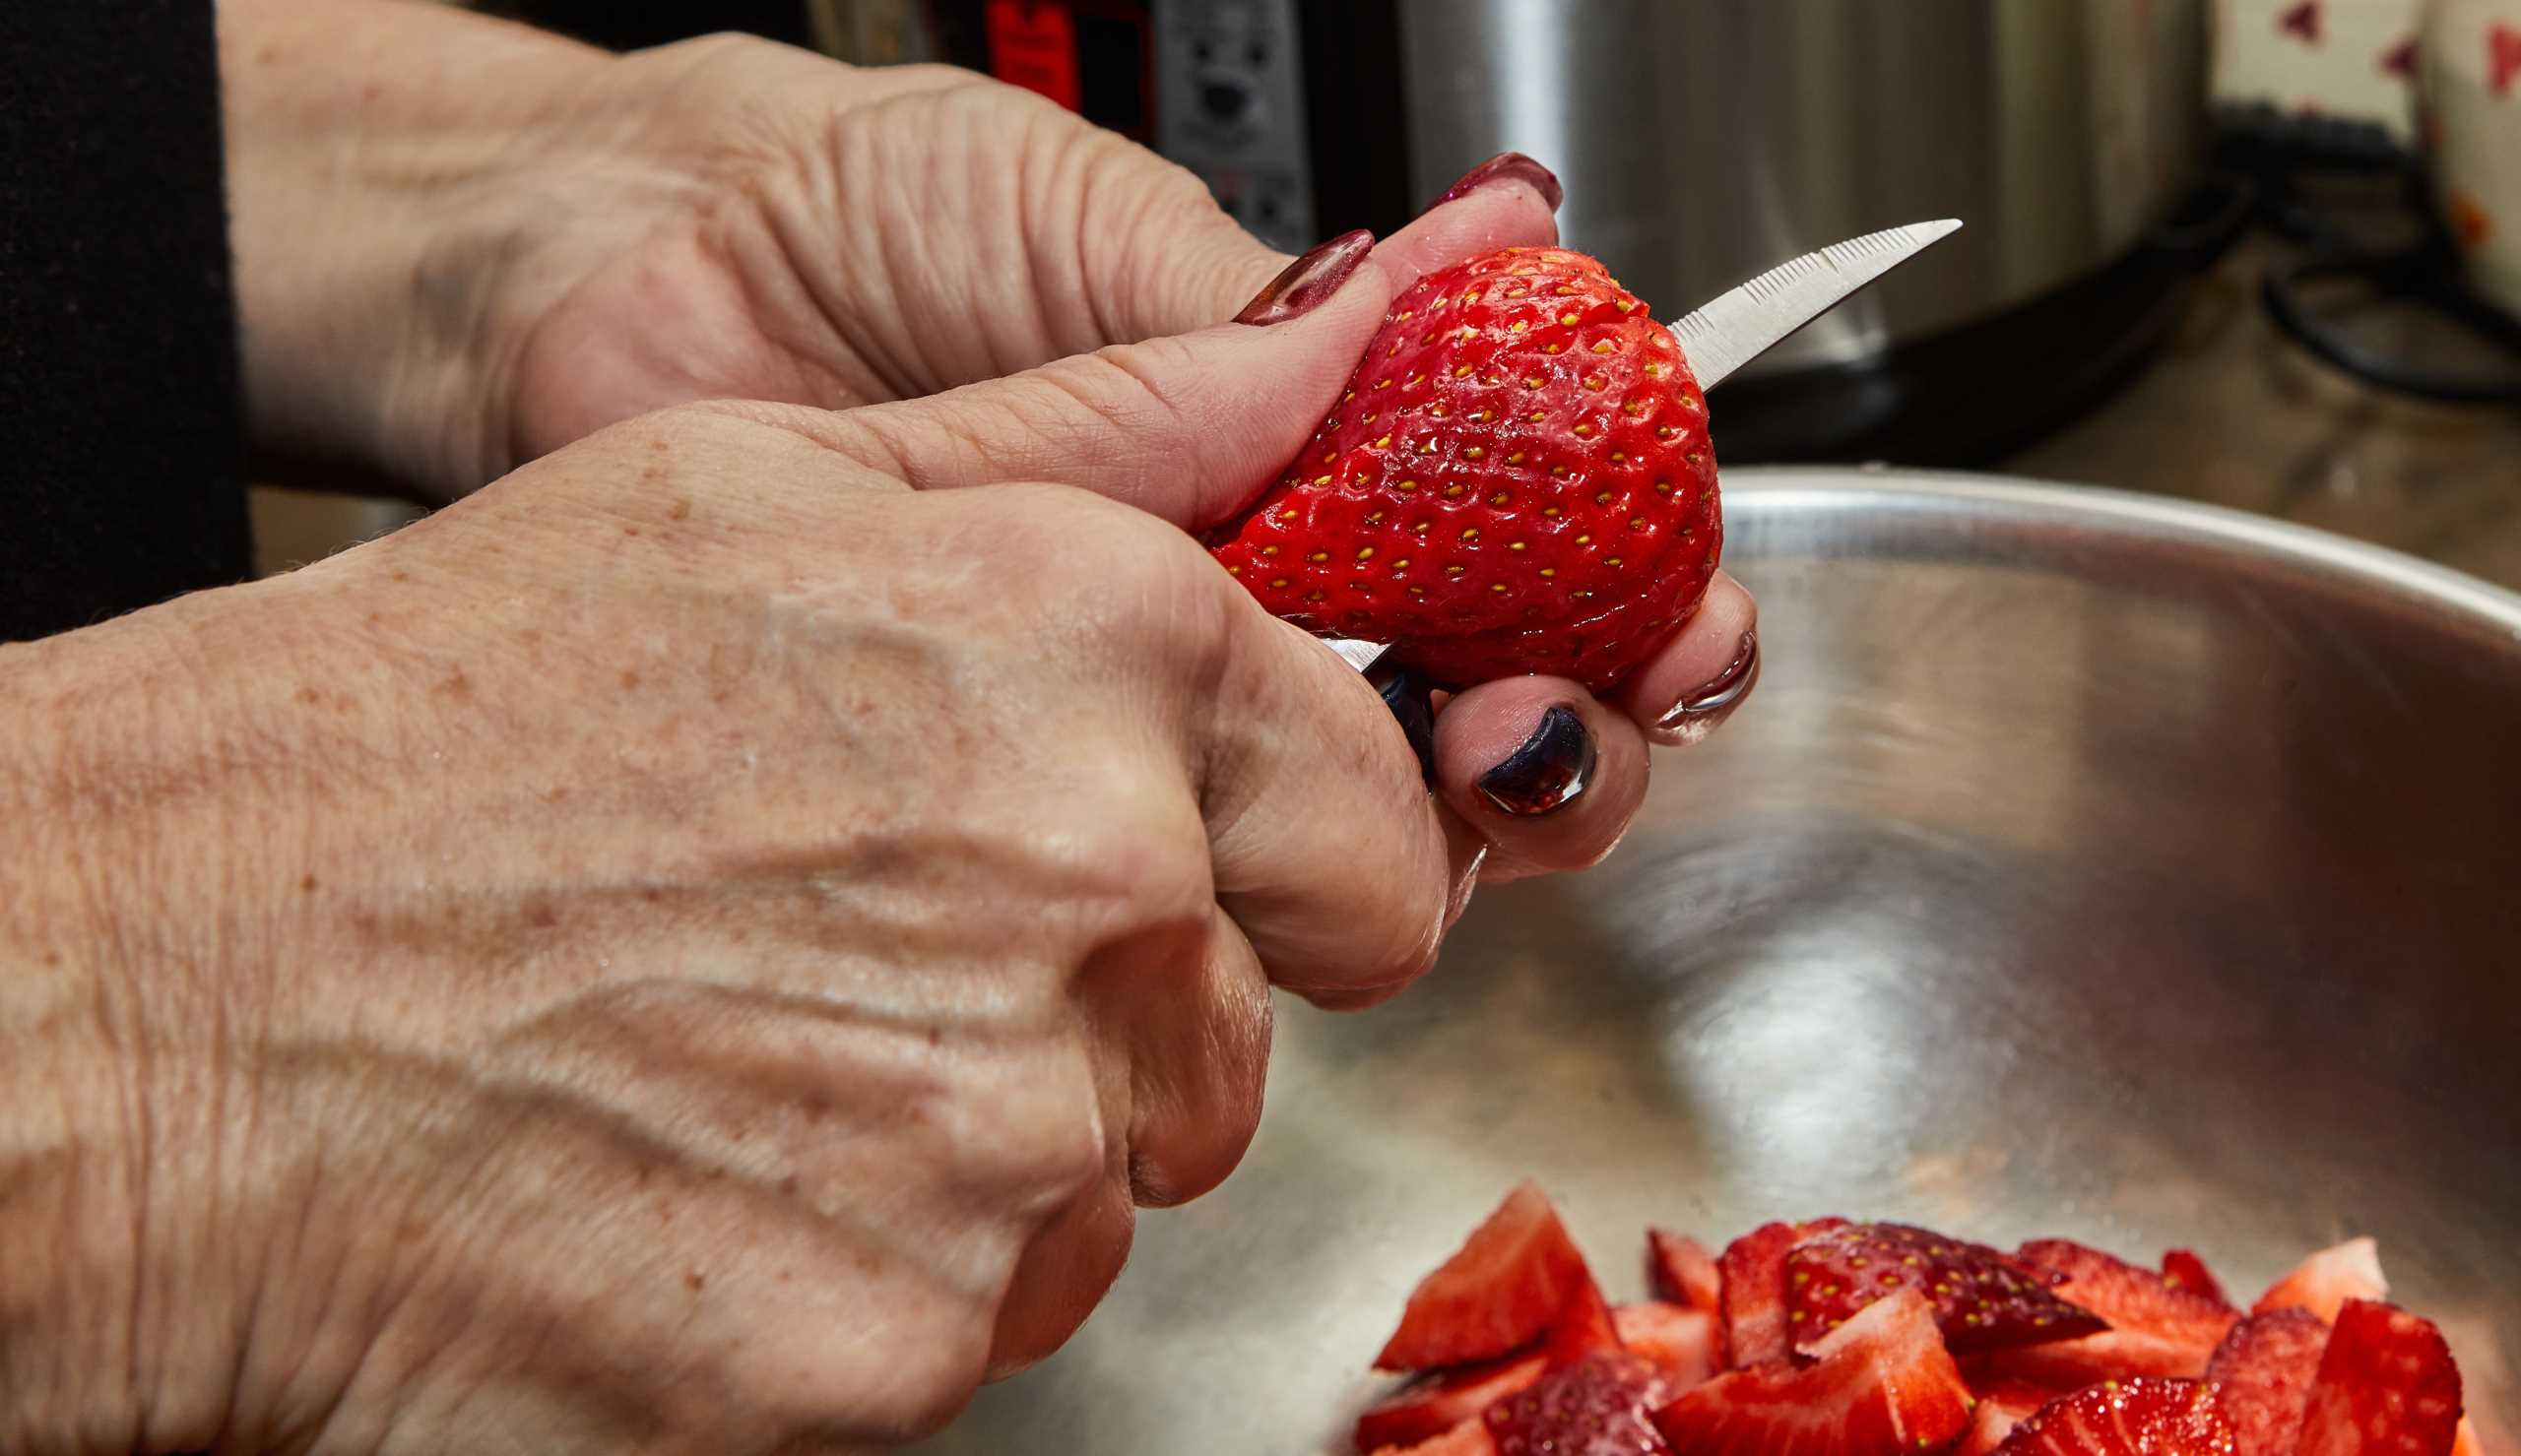 Chef cuts strawberries for dessert in the home kitchen.